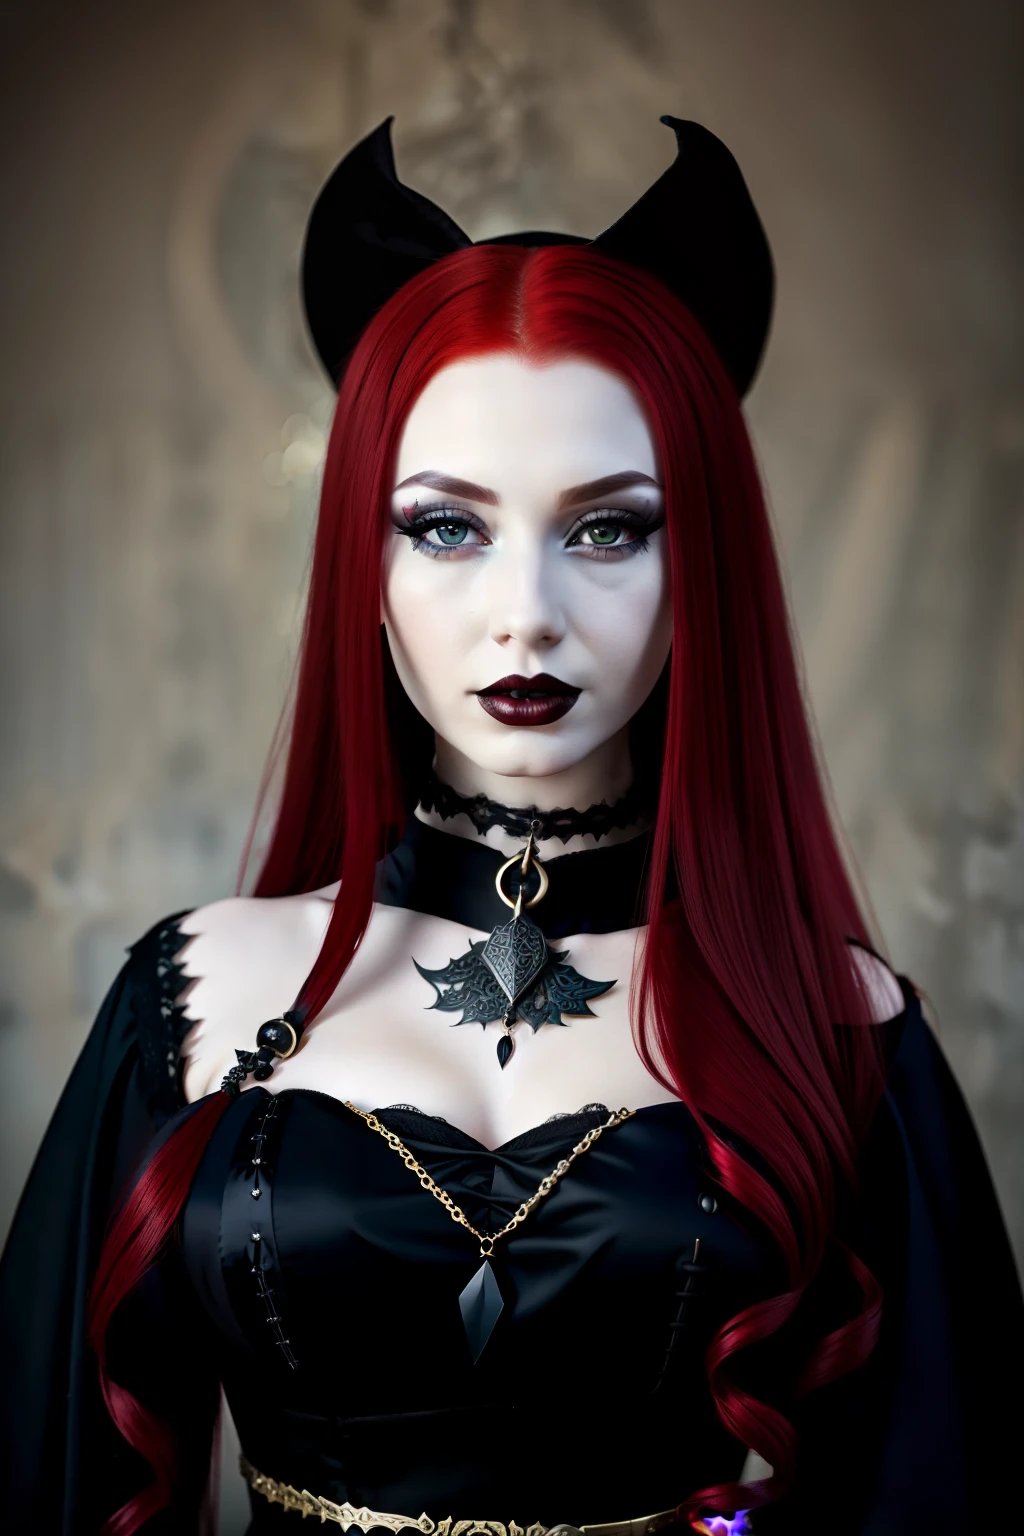 can you make a portrait of a young witch, very beautiful with red hair and pale skin, she has heavy make-up and black lipstick, she wears a black bodice and wears amulets around her neck, award-winning photo, hd, natural lights, neutral background --ar 2:3